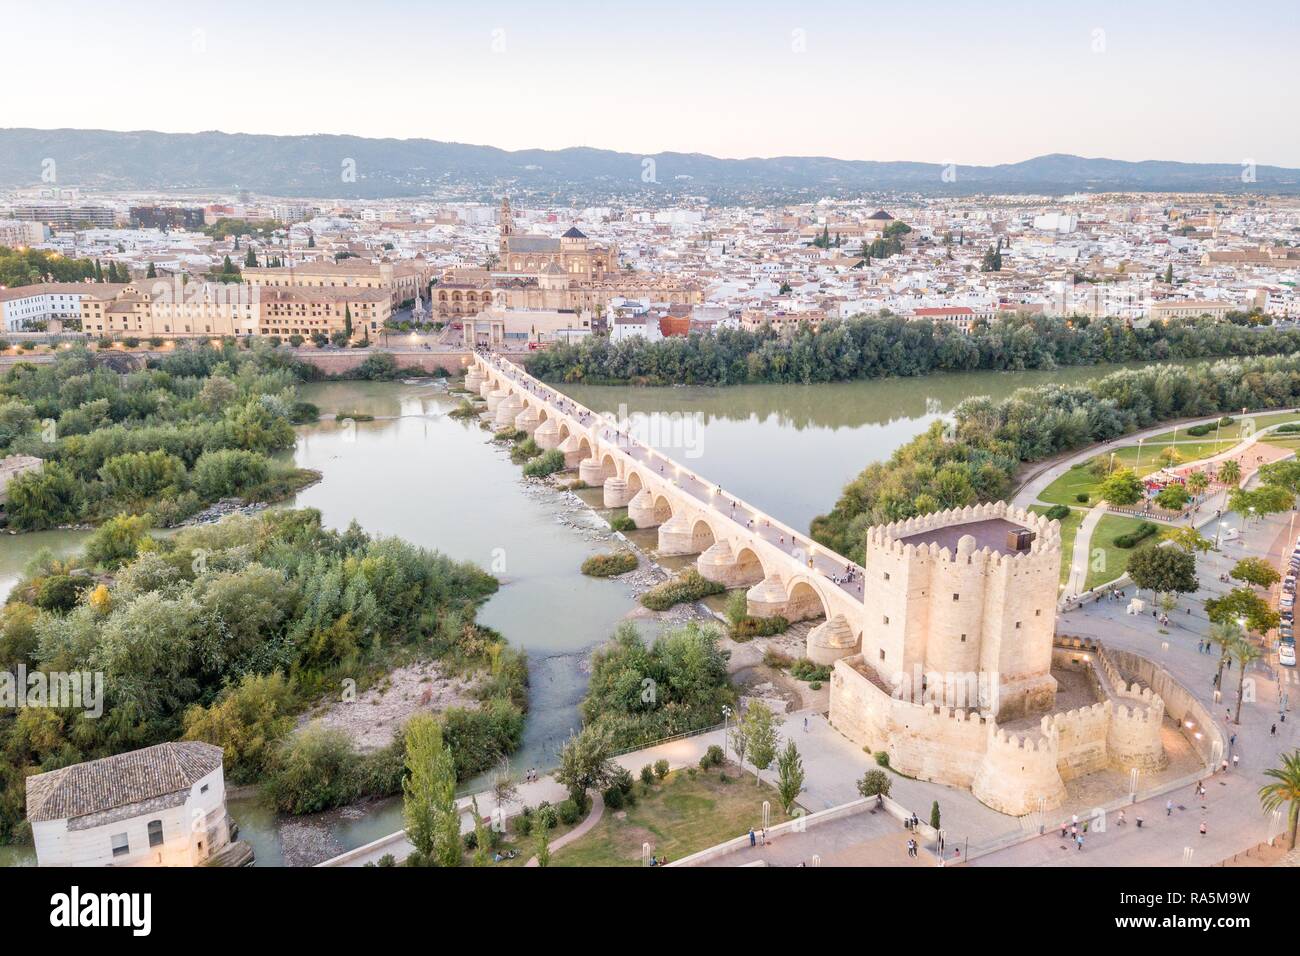 Aerial view of famous Roman bridge and Mosque, Cathedral of Cordoba, Andalusia, Spain Stock Photo